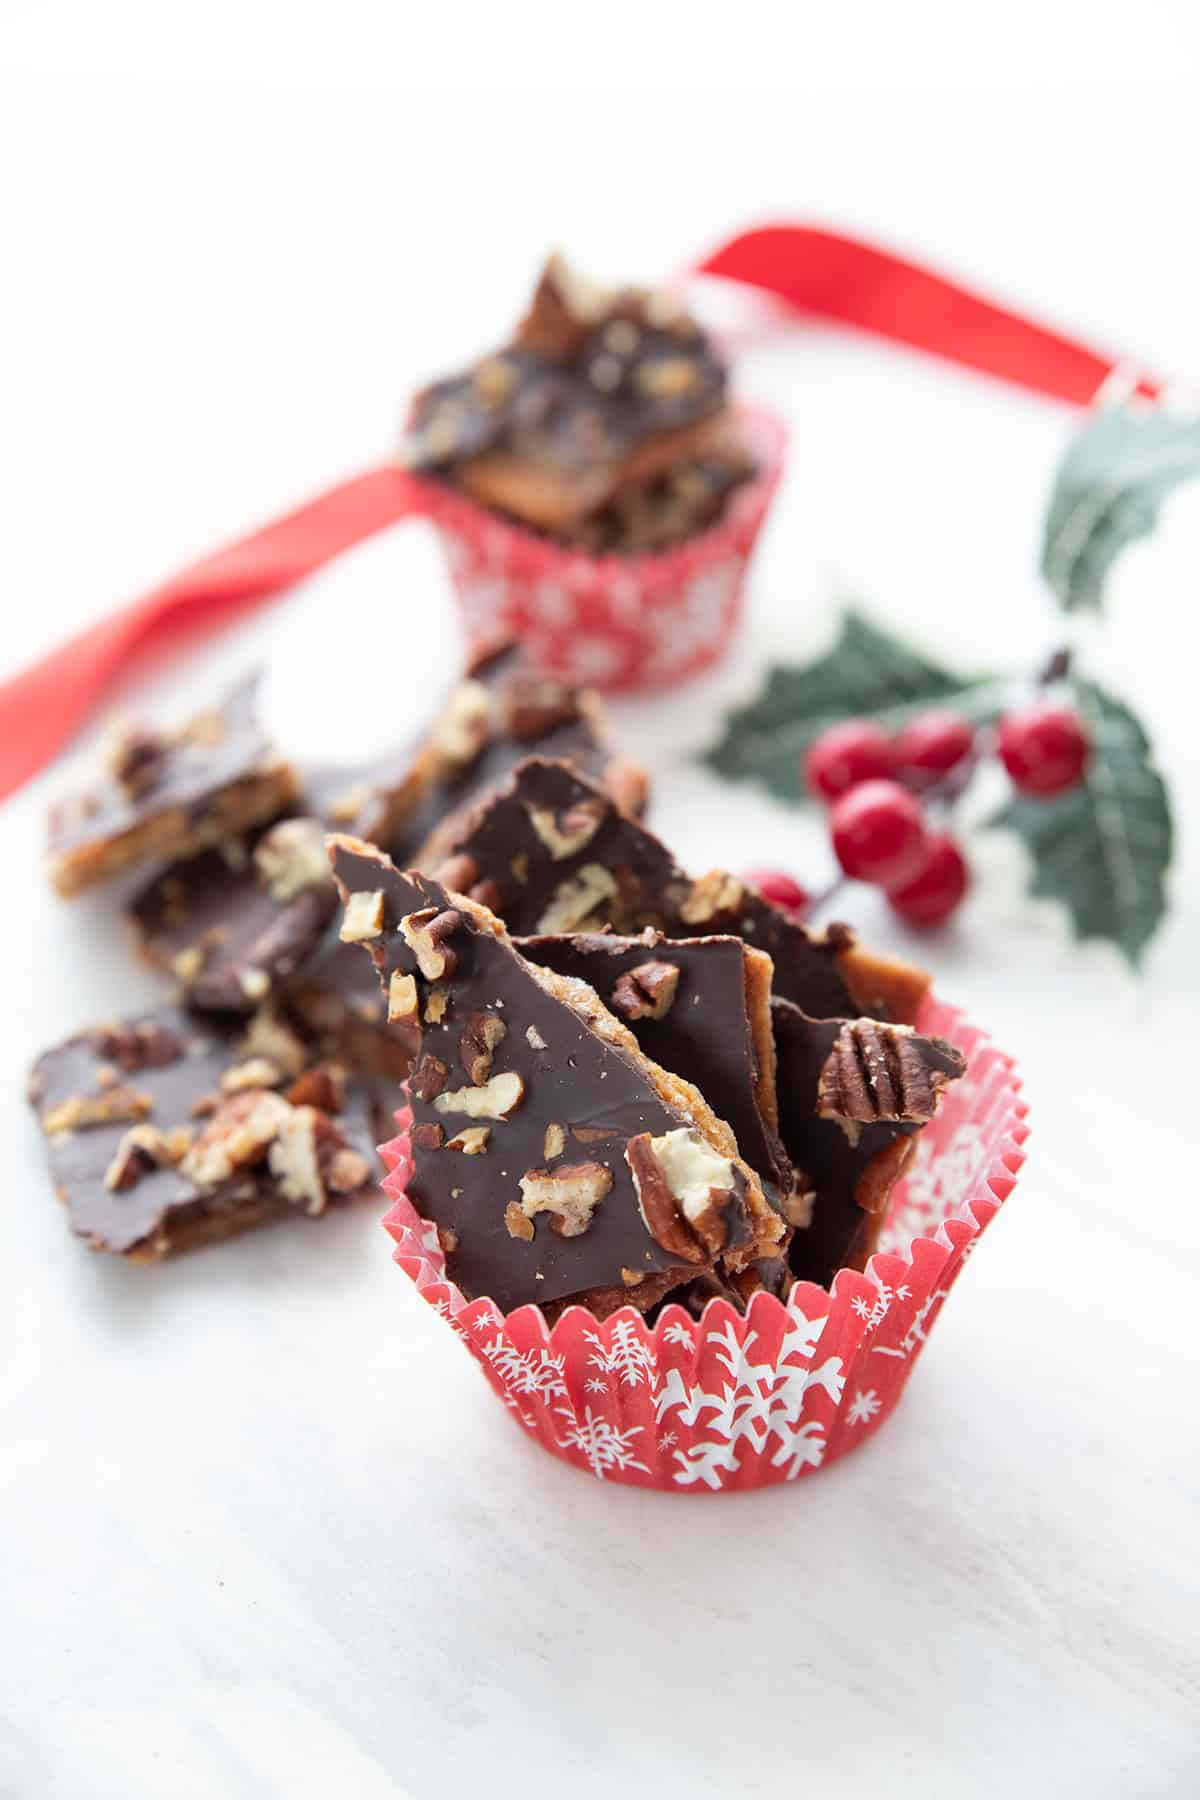 Pieces of keto toffee in a red and white holiday patterned cup.